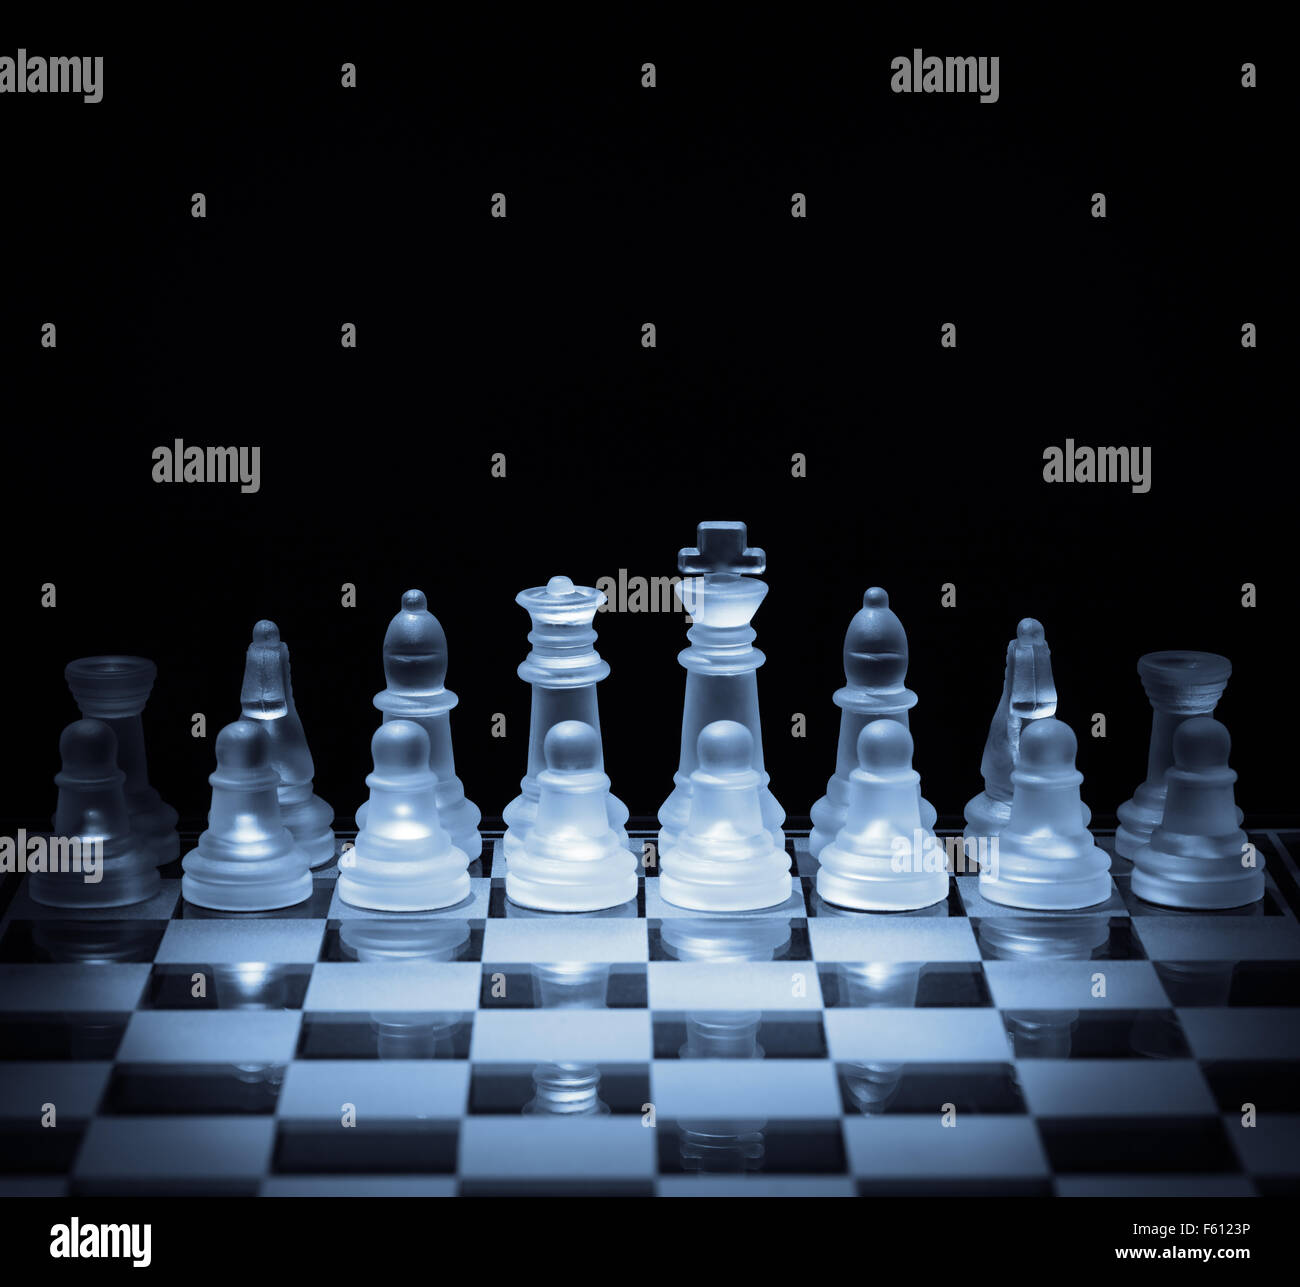 Business strategy and competition concept chess board ready for battle Stock Photo